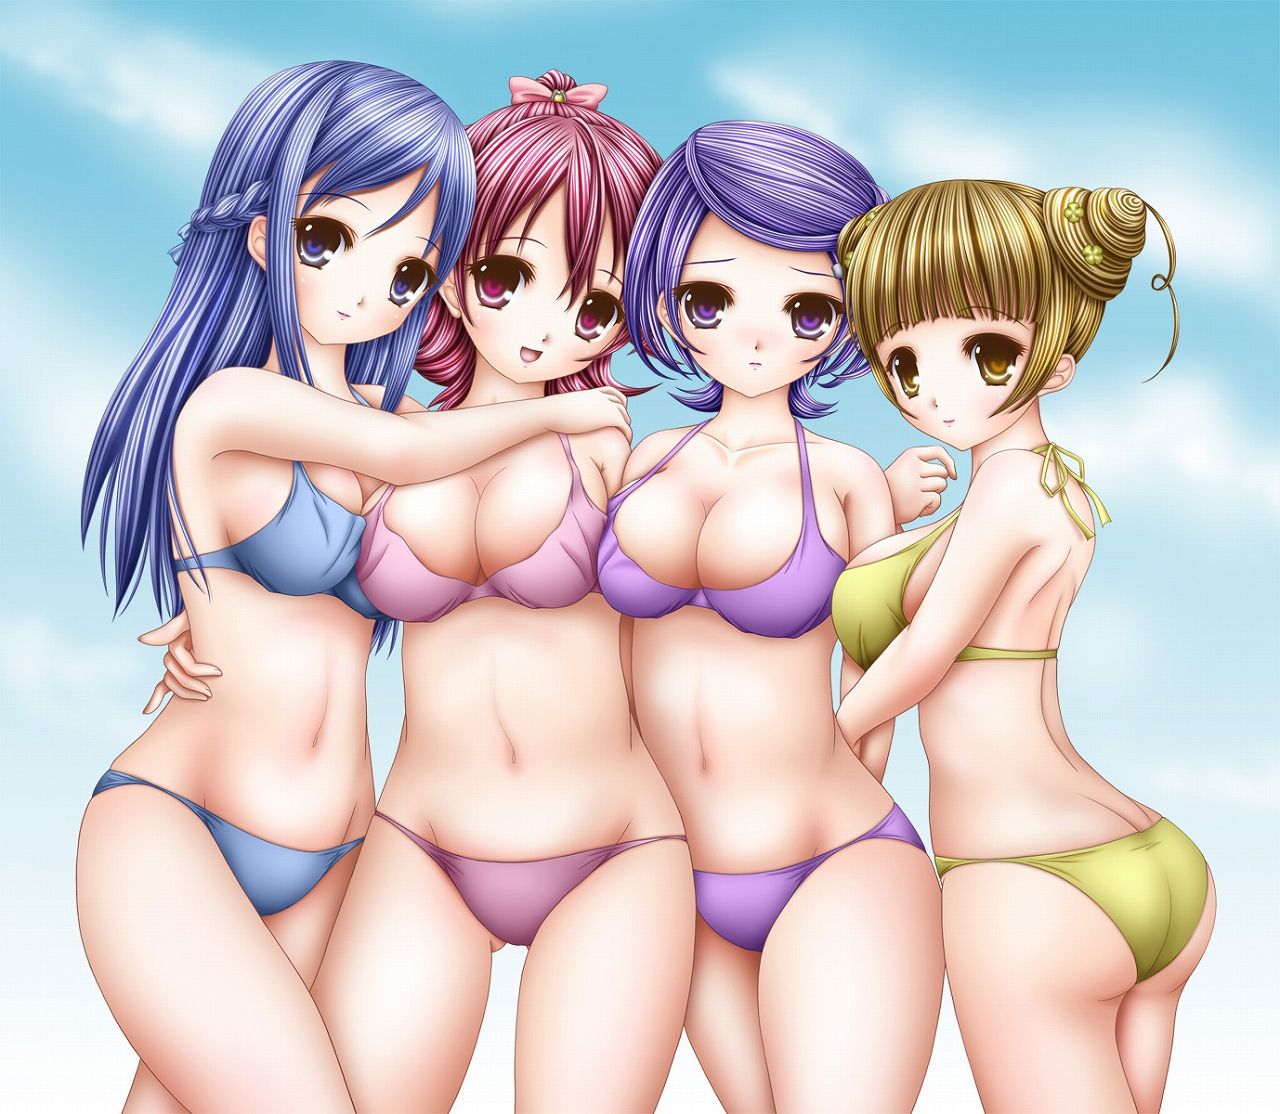 Beautiful girl image of bikini appearance no more clothes and underwear [secondary, swimsuit] Part 4 5